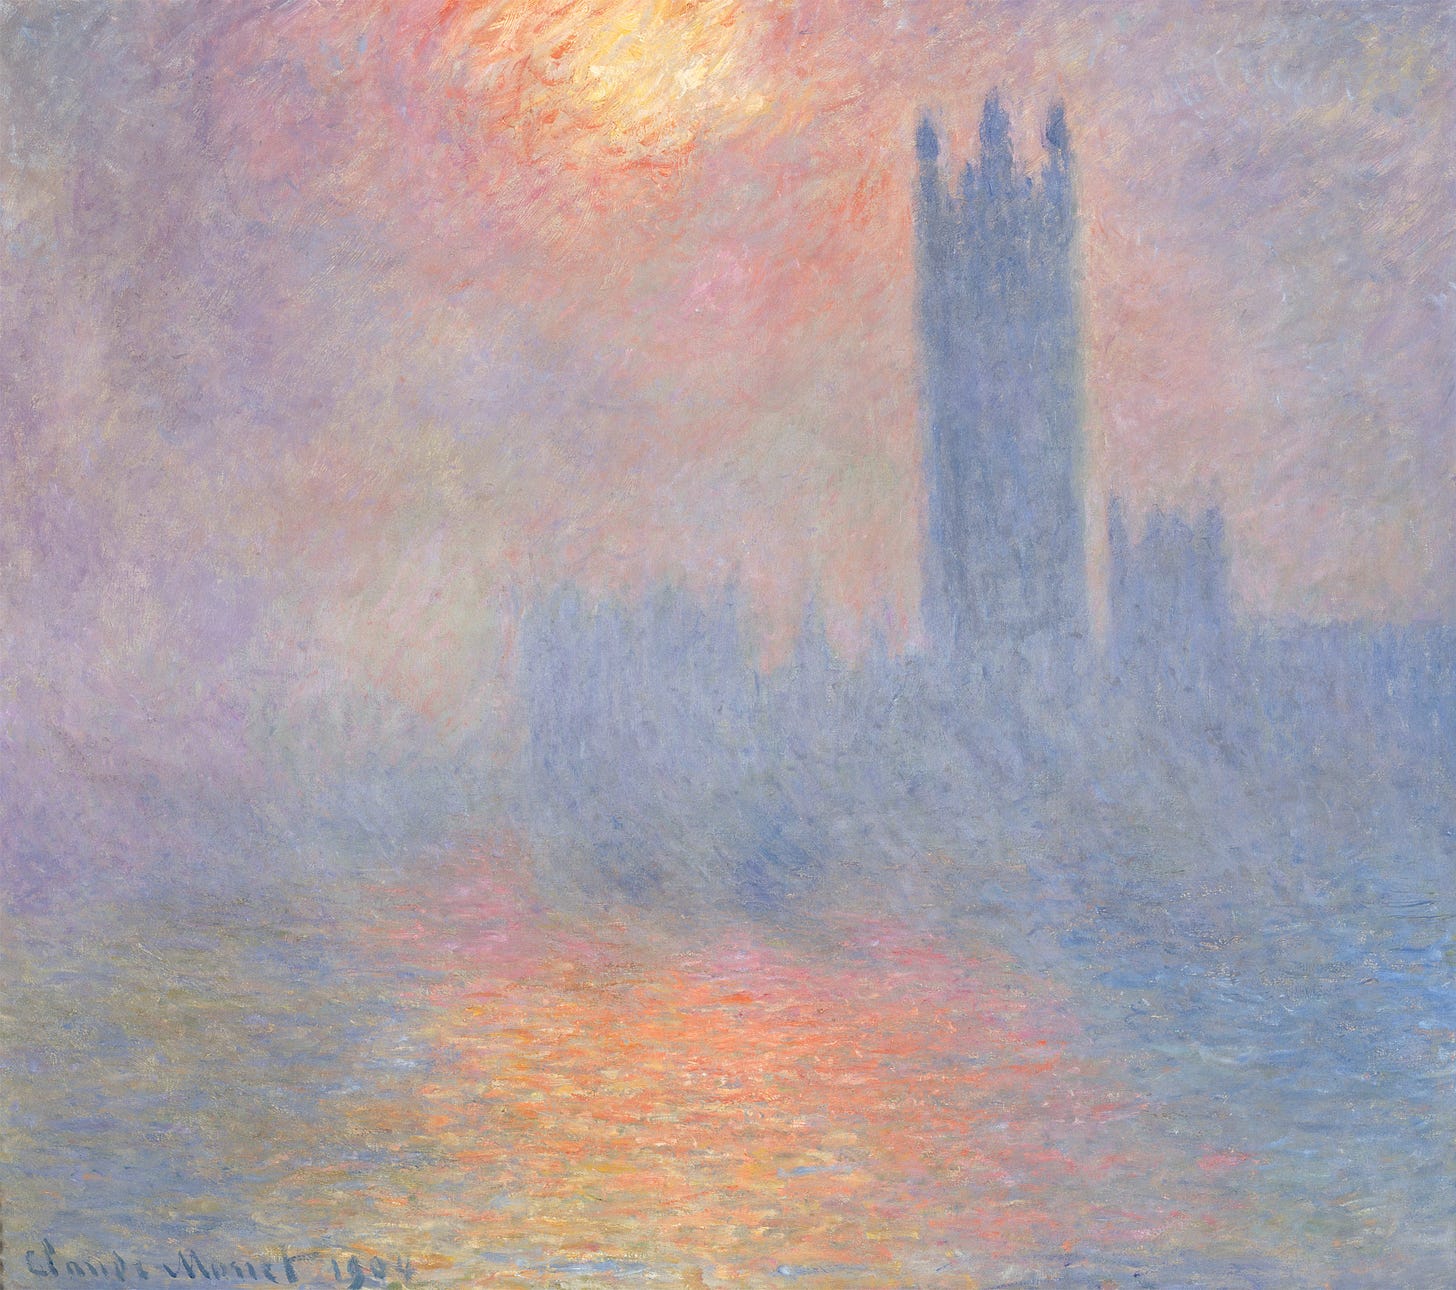 Monet and London. Views of the Thames - The Courtauld